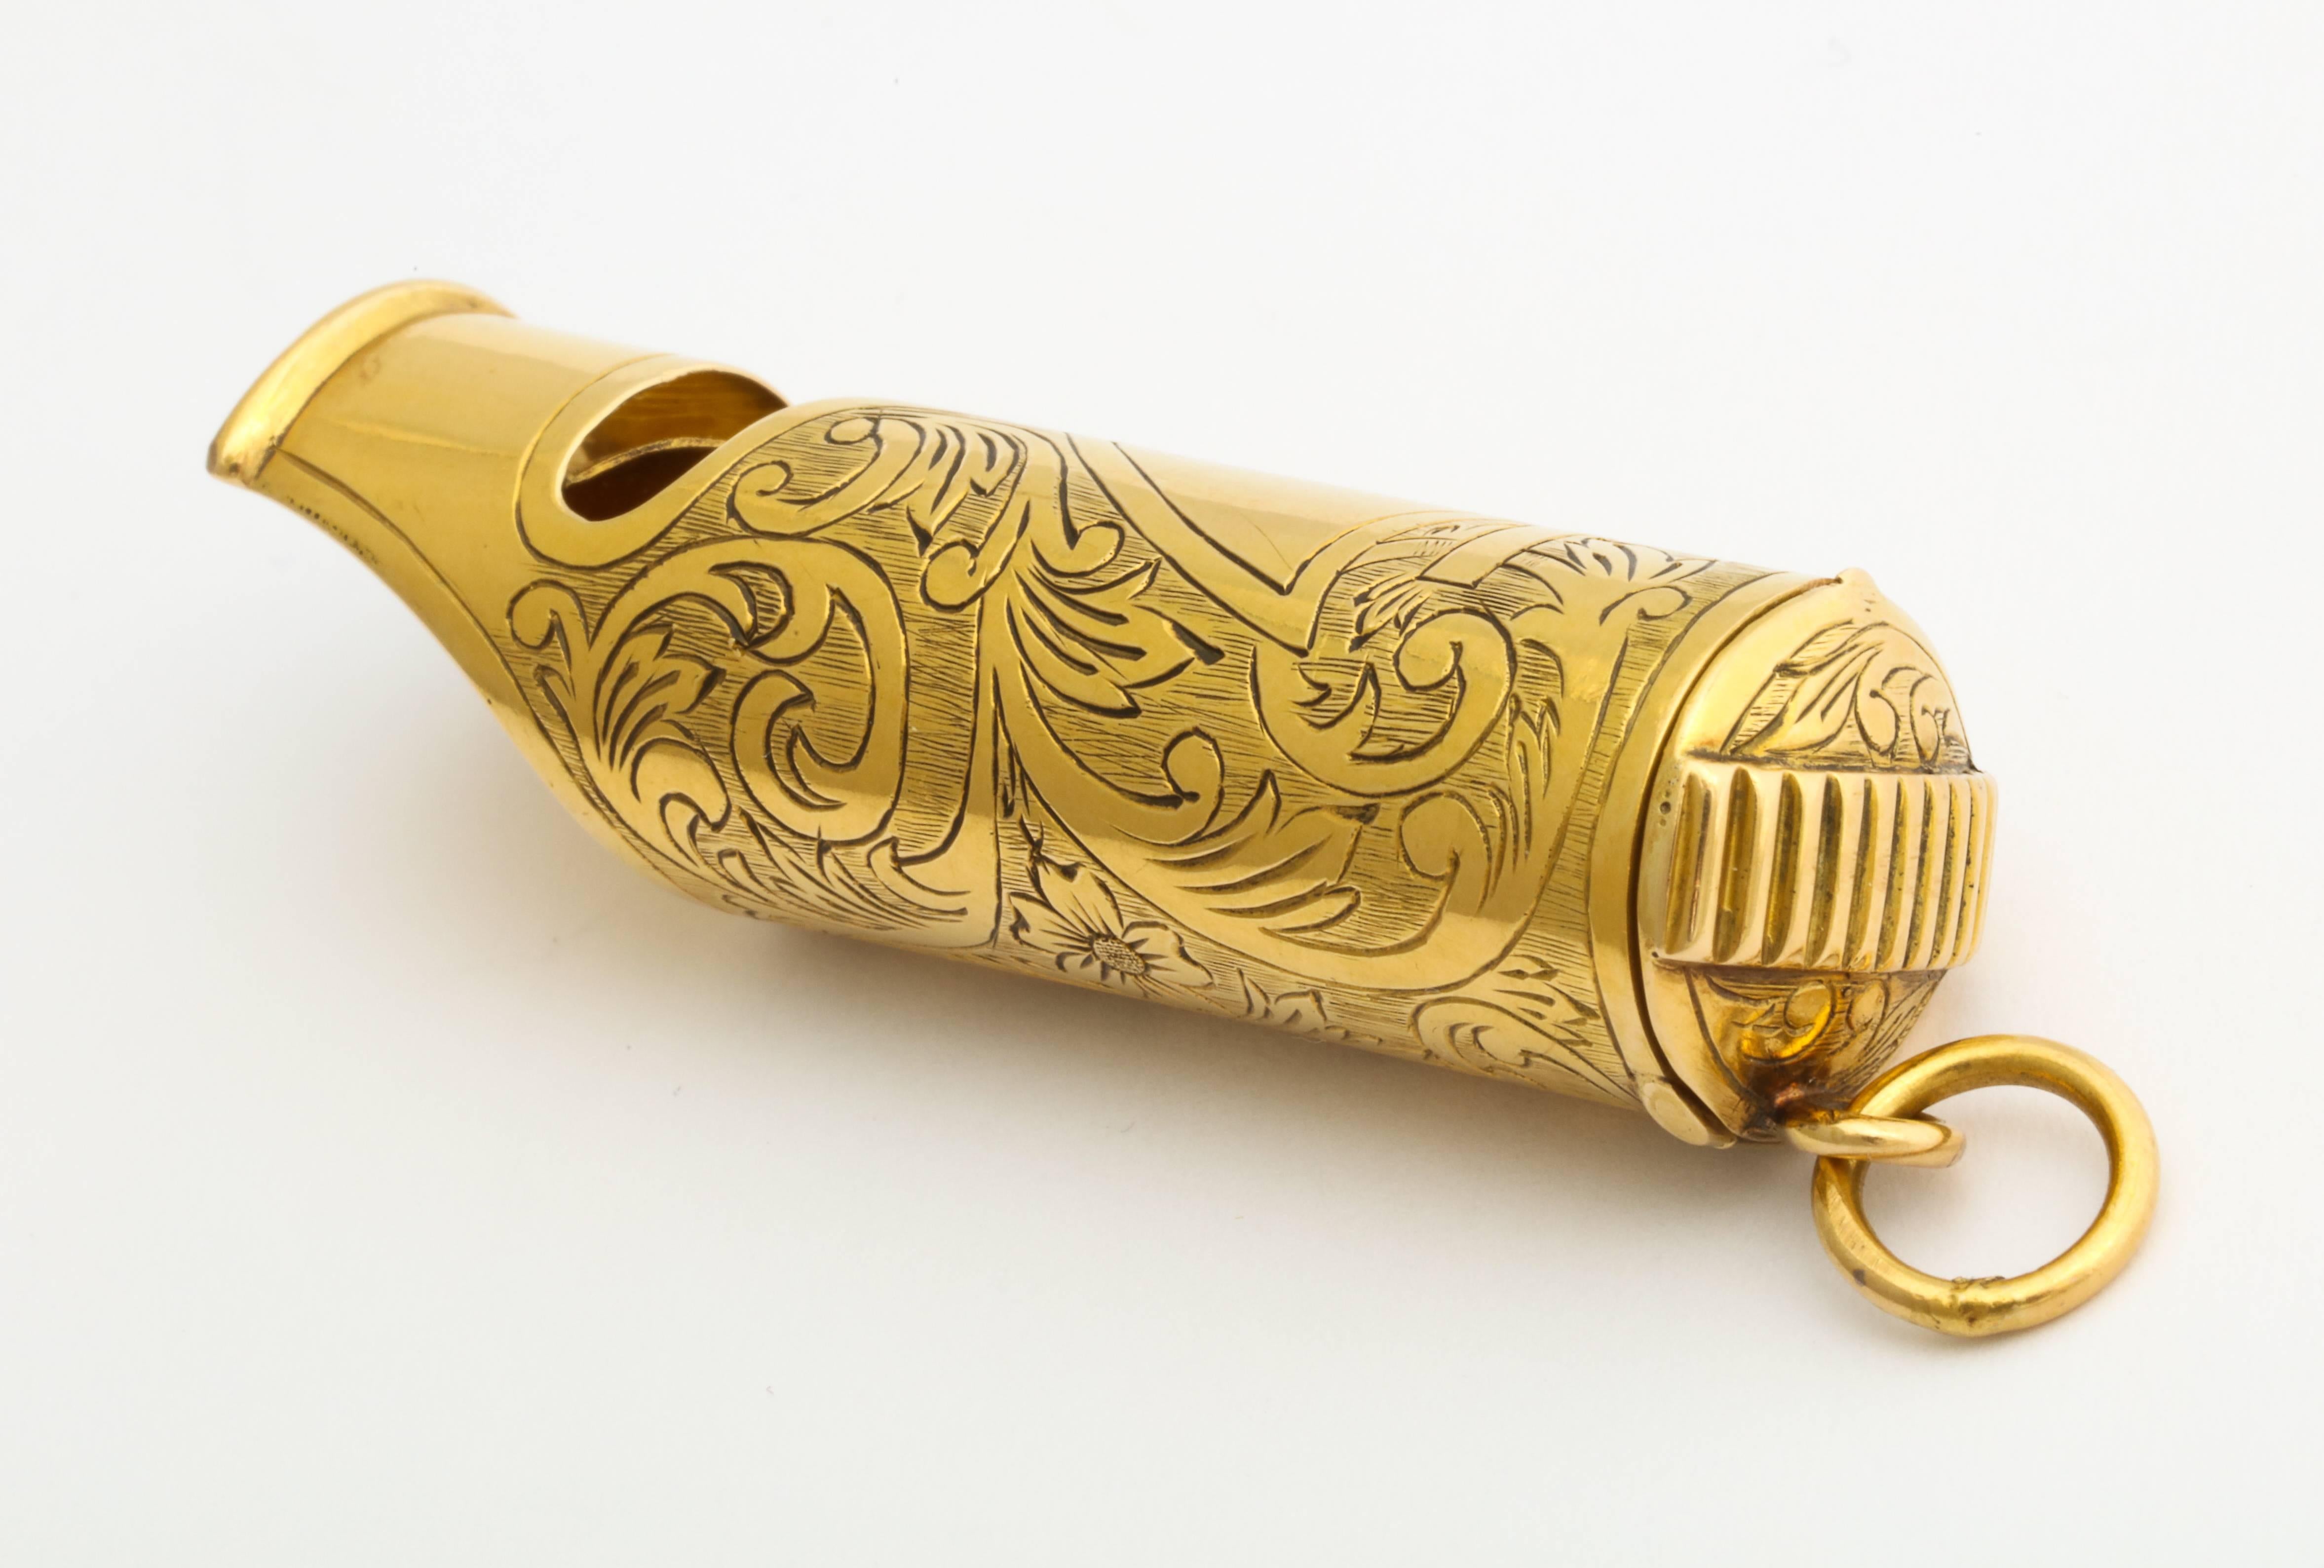 An unusual and elegant turn of the century 18K gold carriage whistle, worn by a gentleman as a watch fob or a lady on her chatelaine, with hand engraved flourishes, the match striker cover hinges open to a compartment that originally held matches,